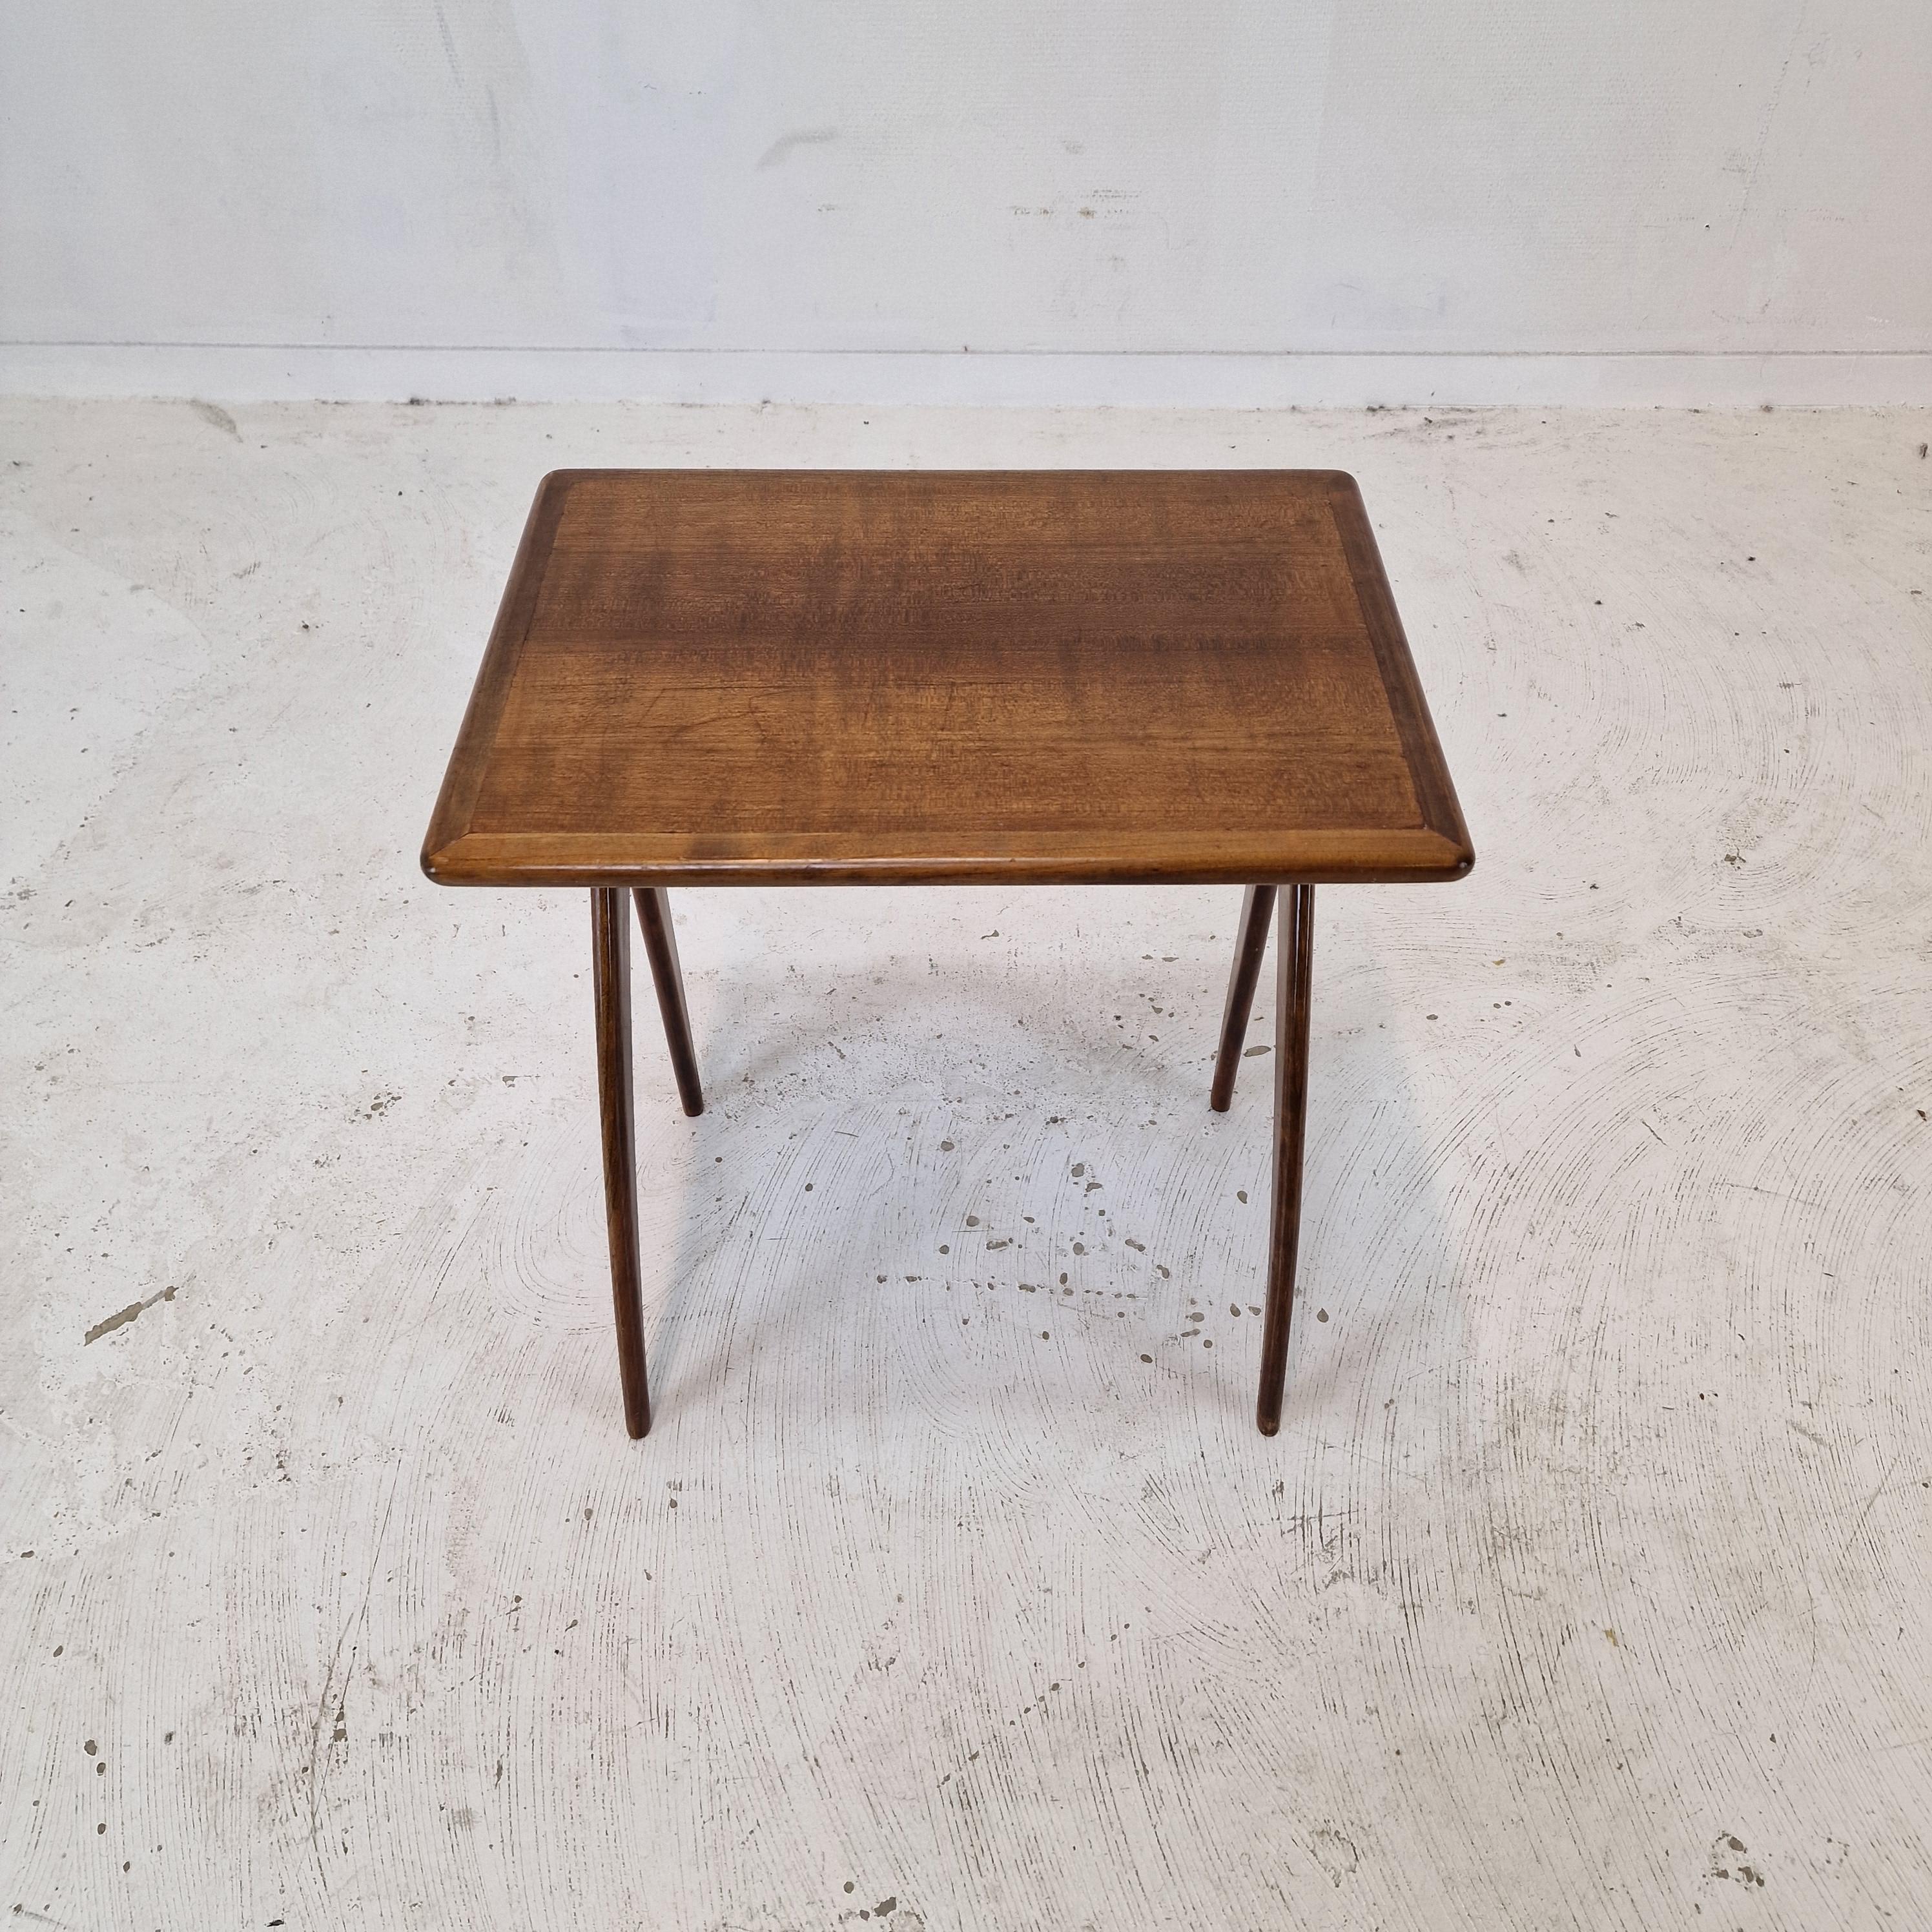 Italian Wooden Side Table, 1930s For Sale 1